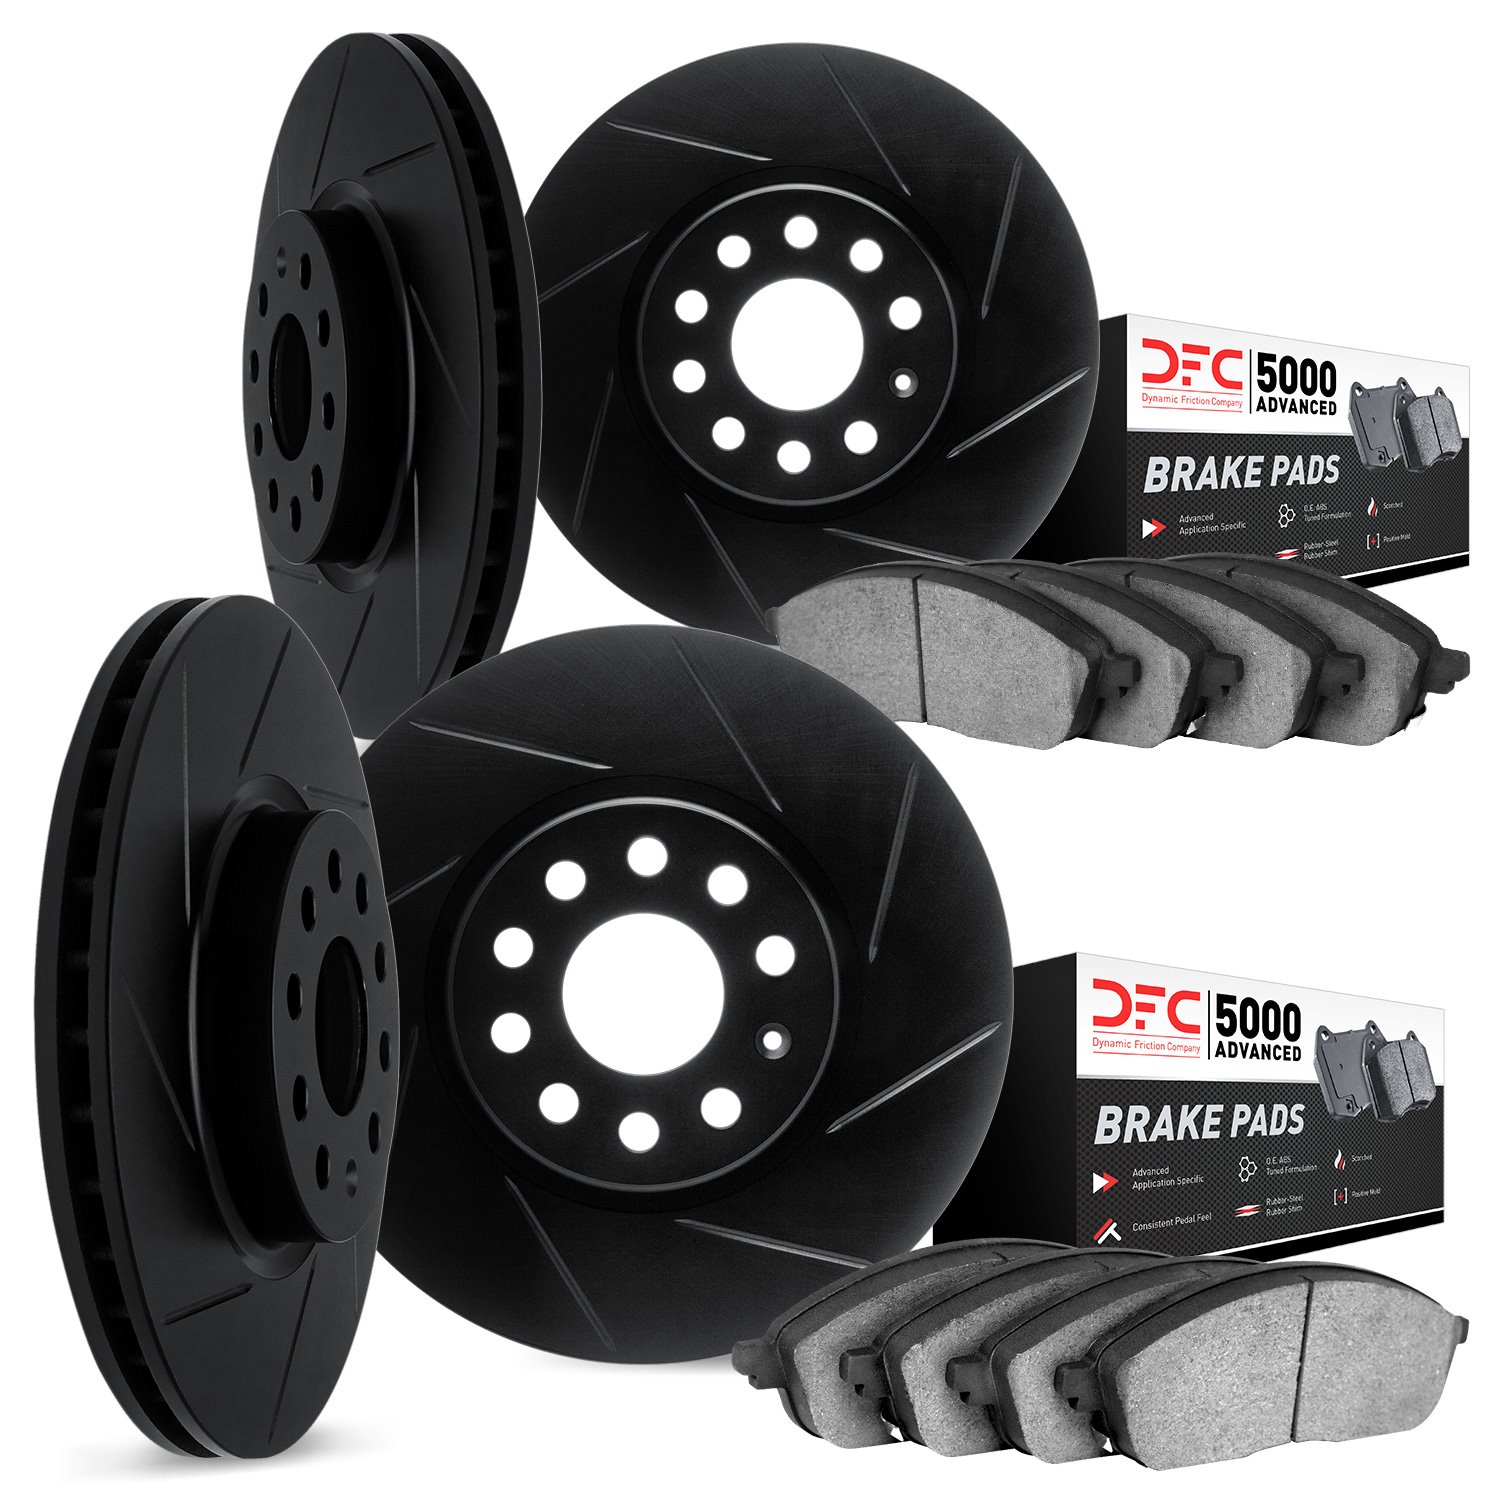 3514-31041 Slotted Brake Rotors w/5000 Advanced Brake Pads Kit & Hardware [Black], 2004-2006 BMW, Position: Front and Rear